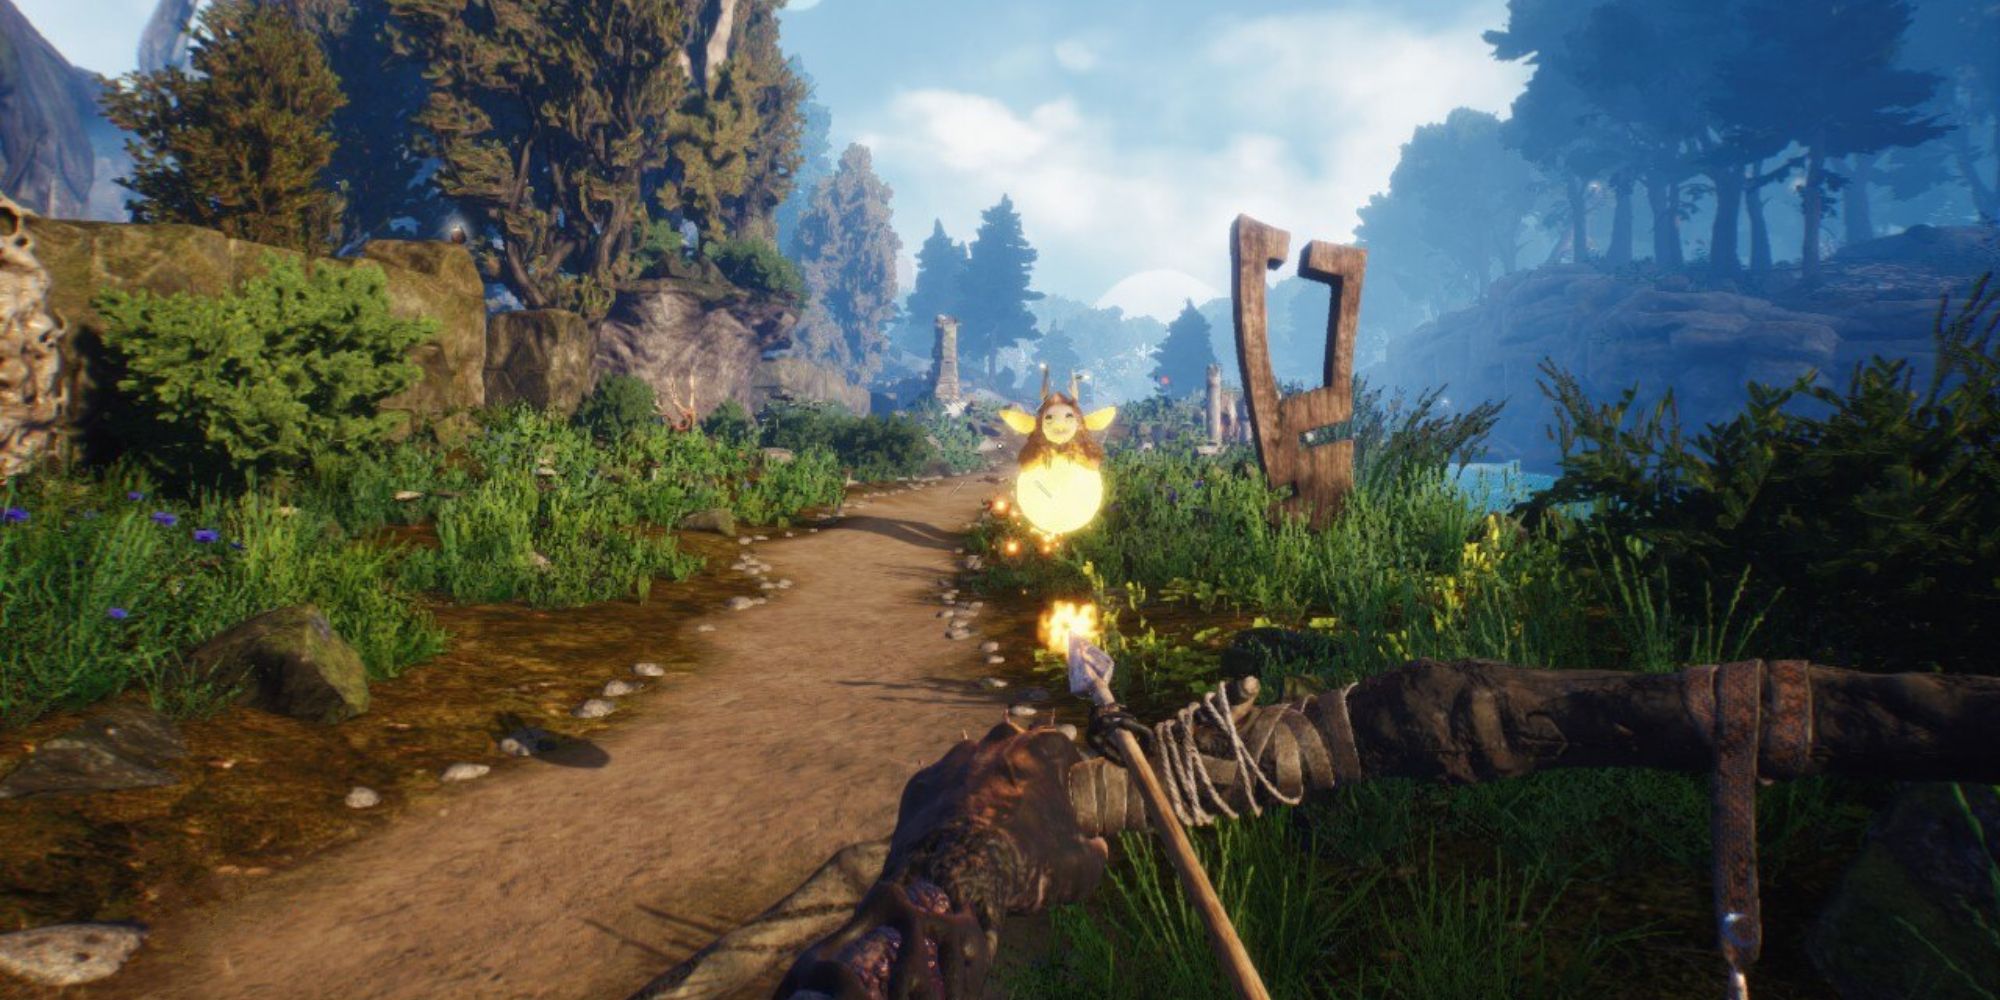 A character aiming a bow at a firely-like creature from a first person perspective